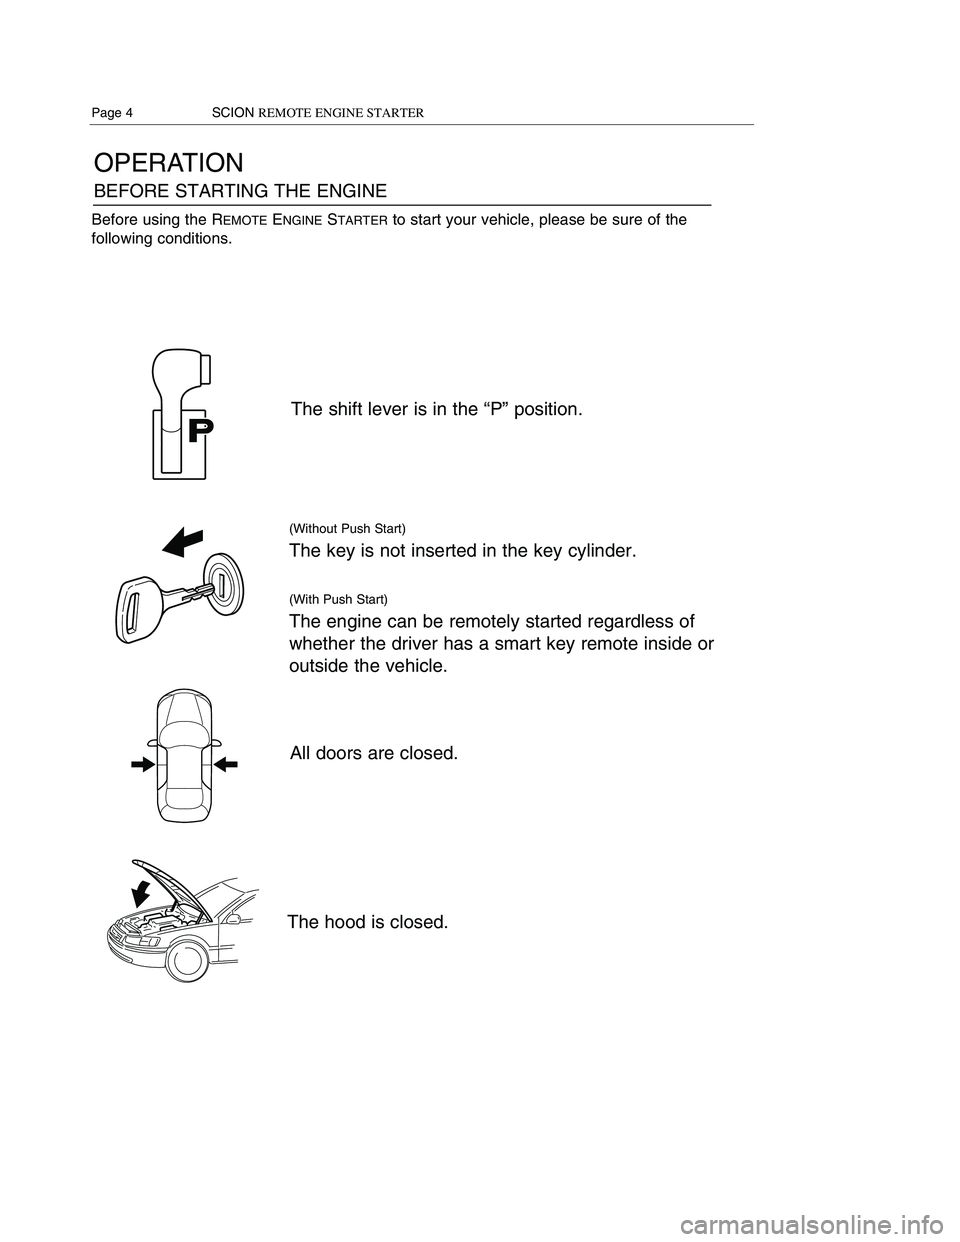 TOYOTA xD 2009  Accessories, Audio & Navigation (in English) 
OPERATION
BEFORE STARTING THE ENGINE
The shift lever is in the “P” position.
(Without Push Start)
The key is not inserted in the key cylinder.
(With Push Start)
The engine can be remotely started